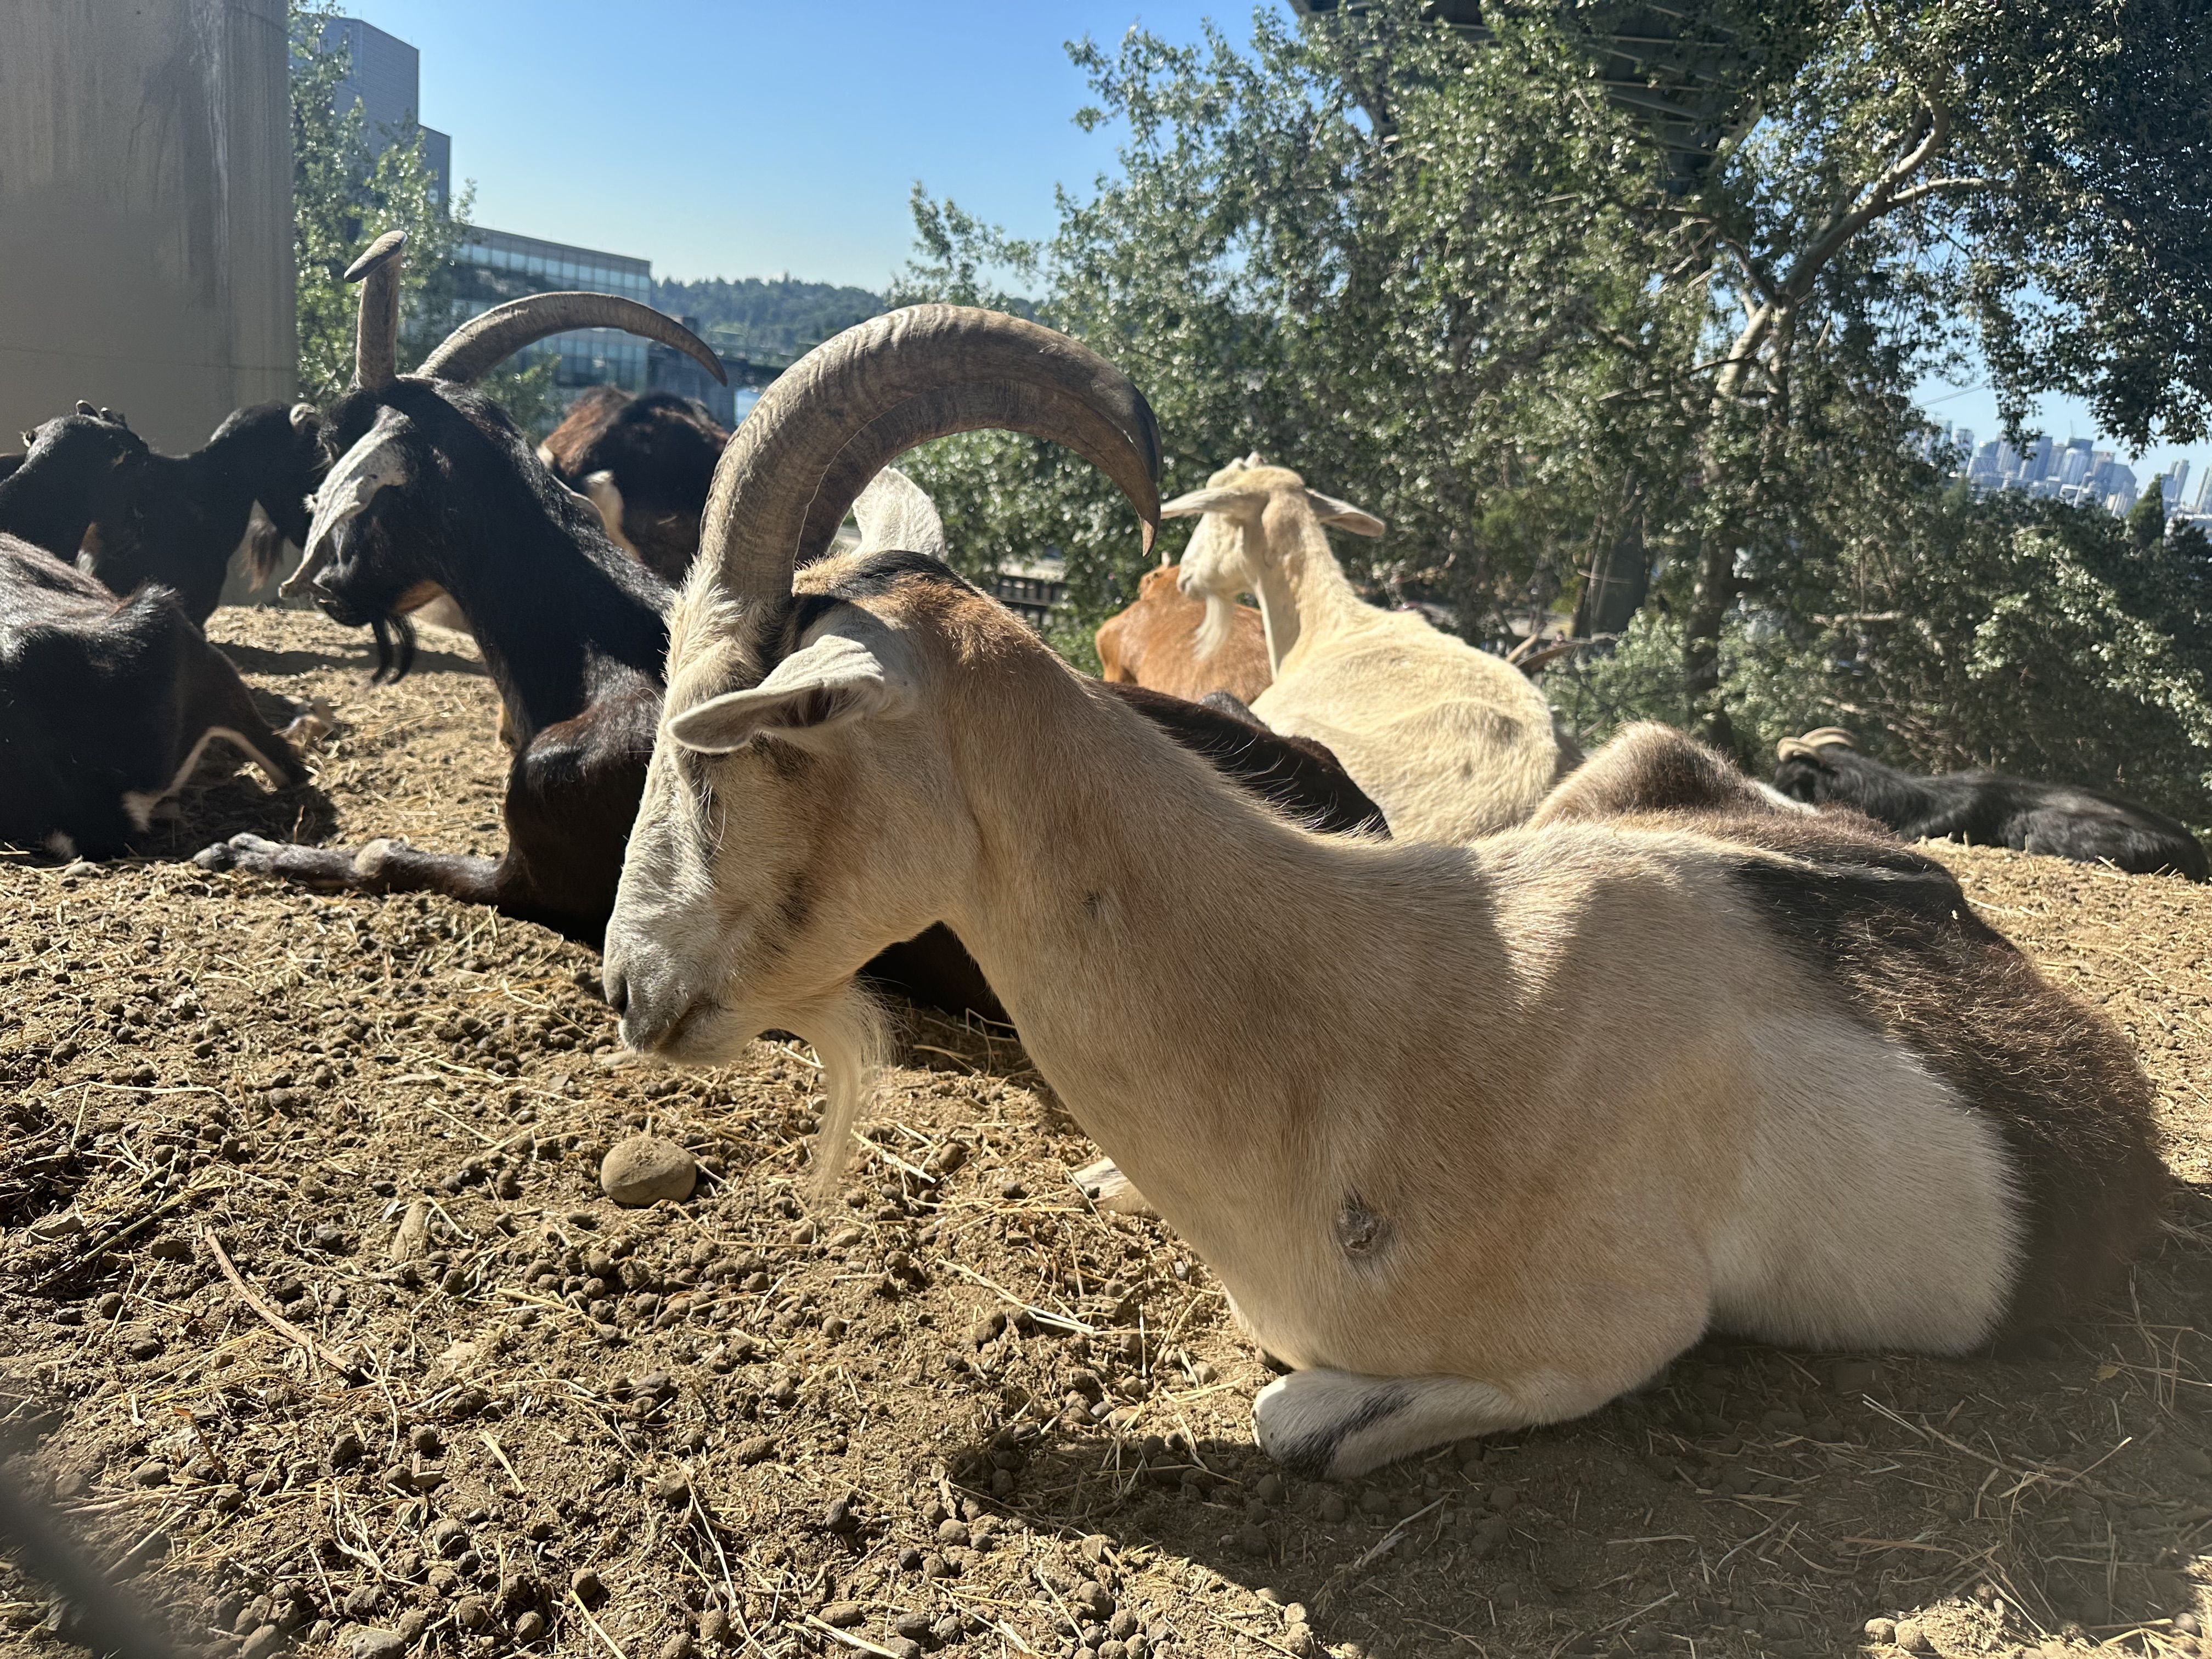 A white goat with large horns lays on the ground surrounded by other goats.